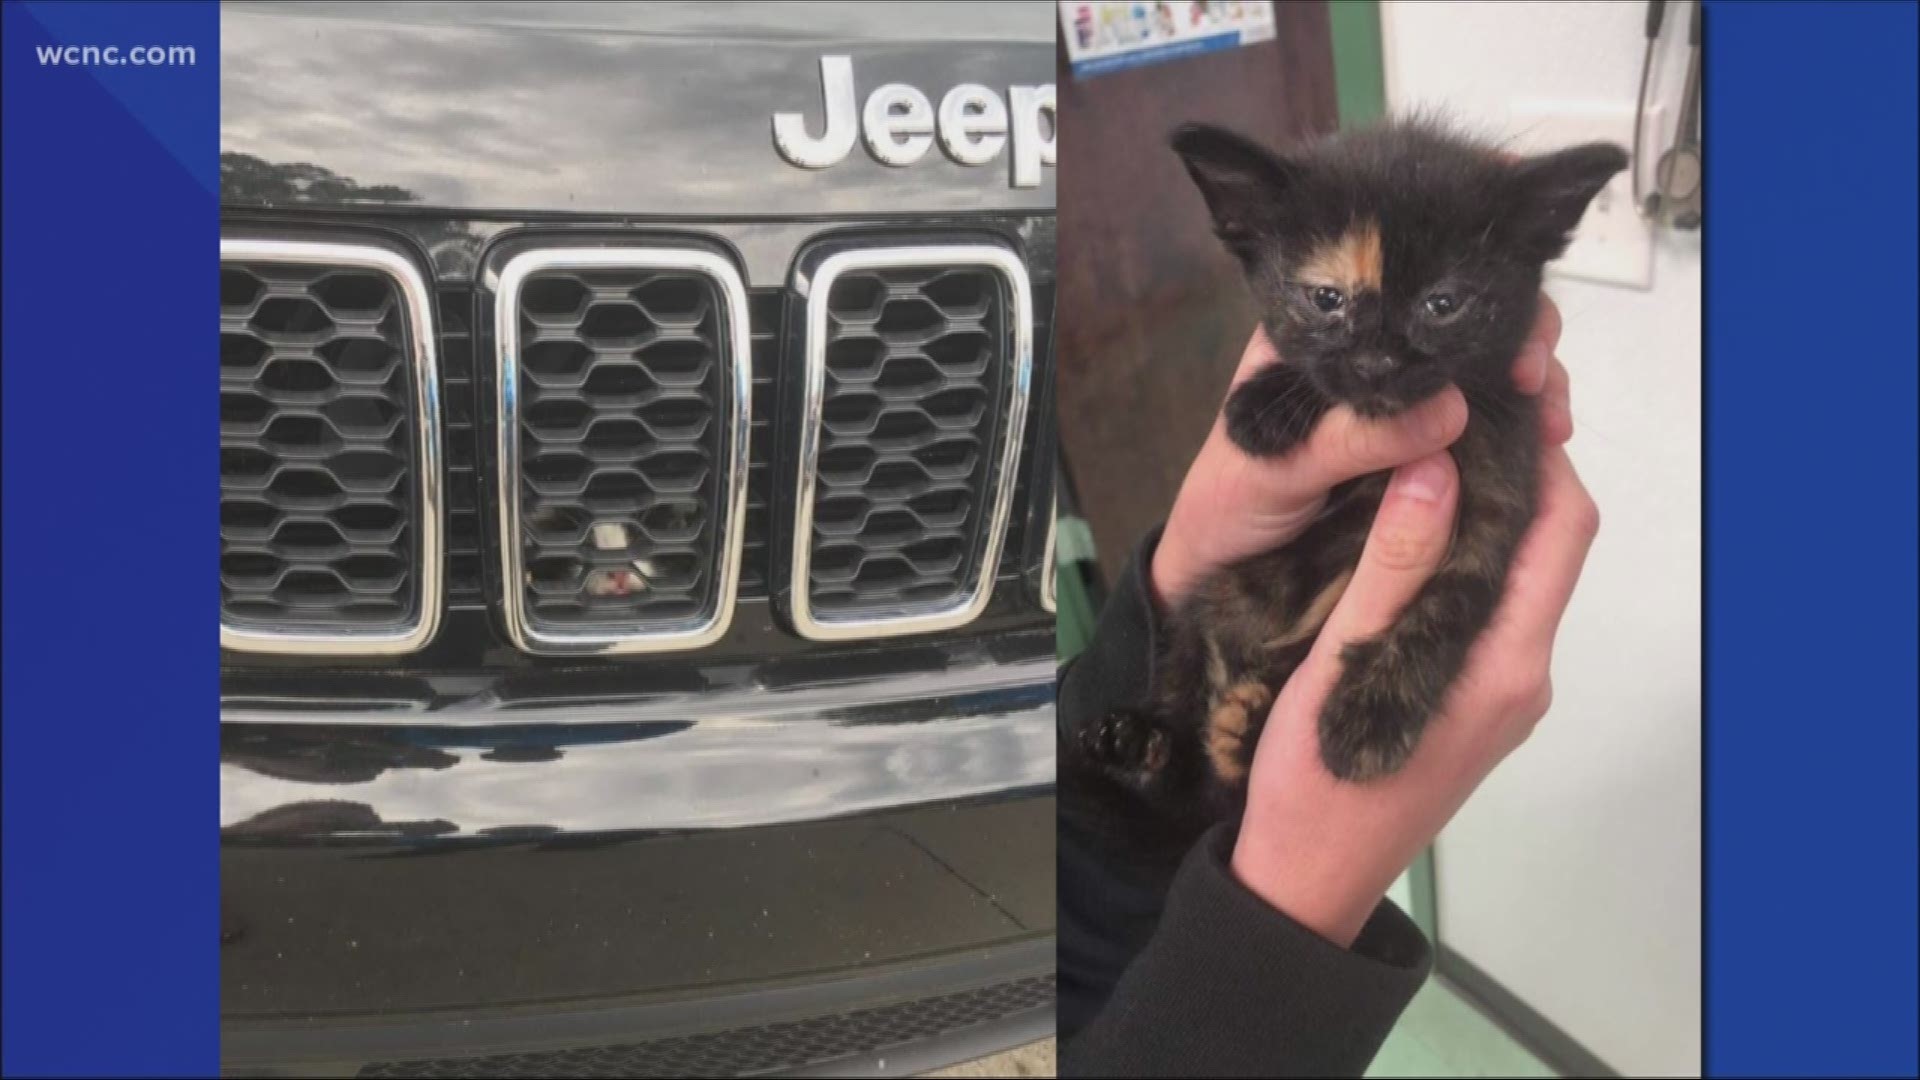 The community banded together to help two separate kittens get free from two separate cars. Both kittens are safe and in recovery now.